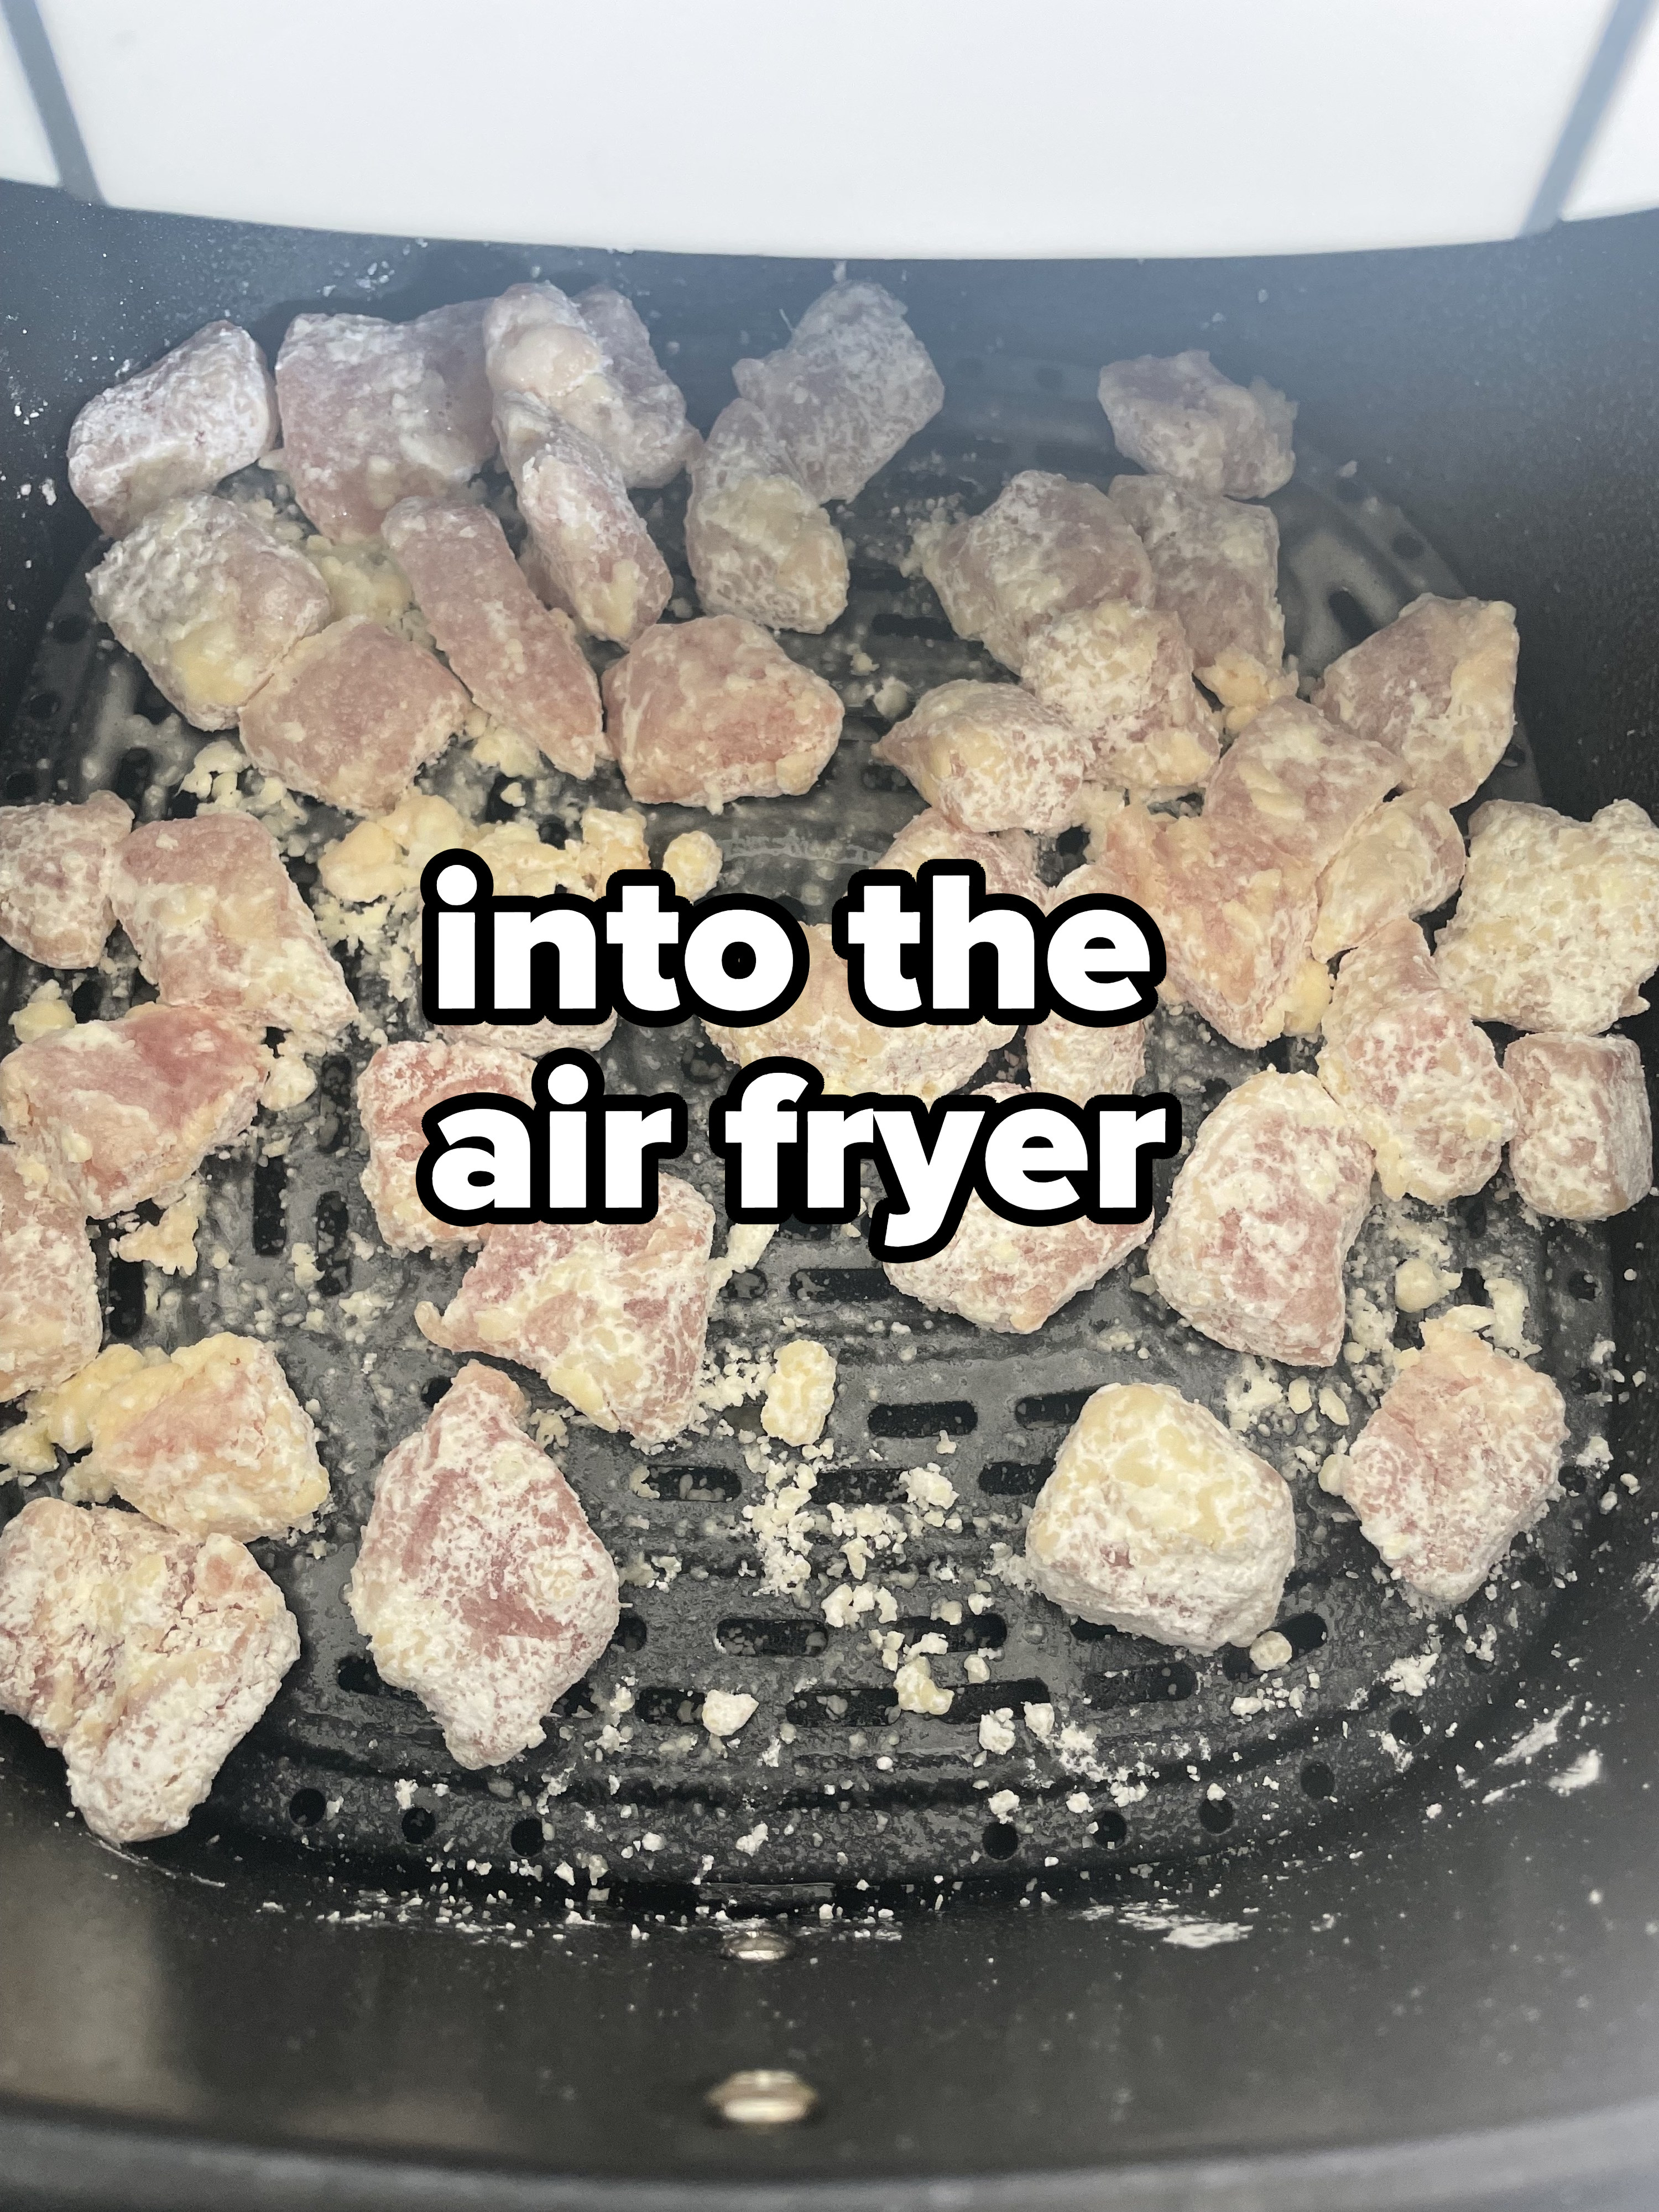 Air frying the pork pieces